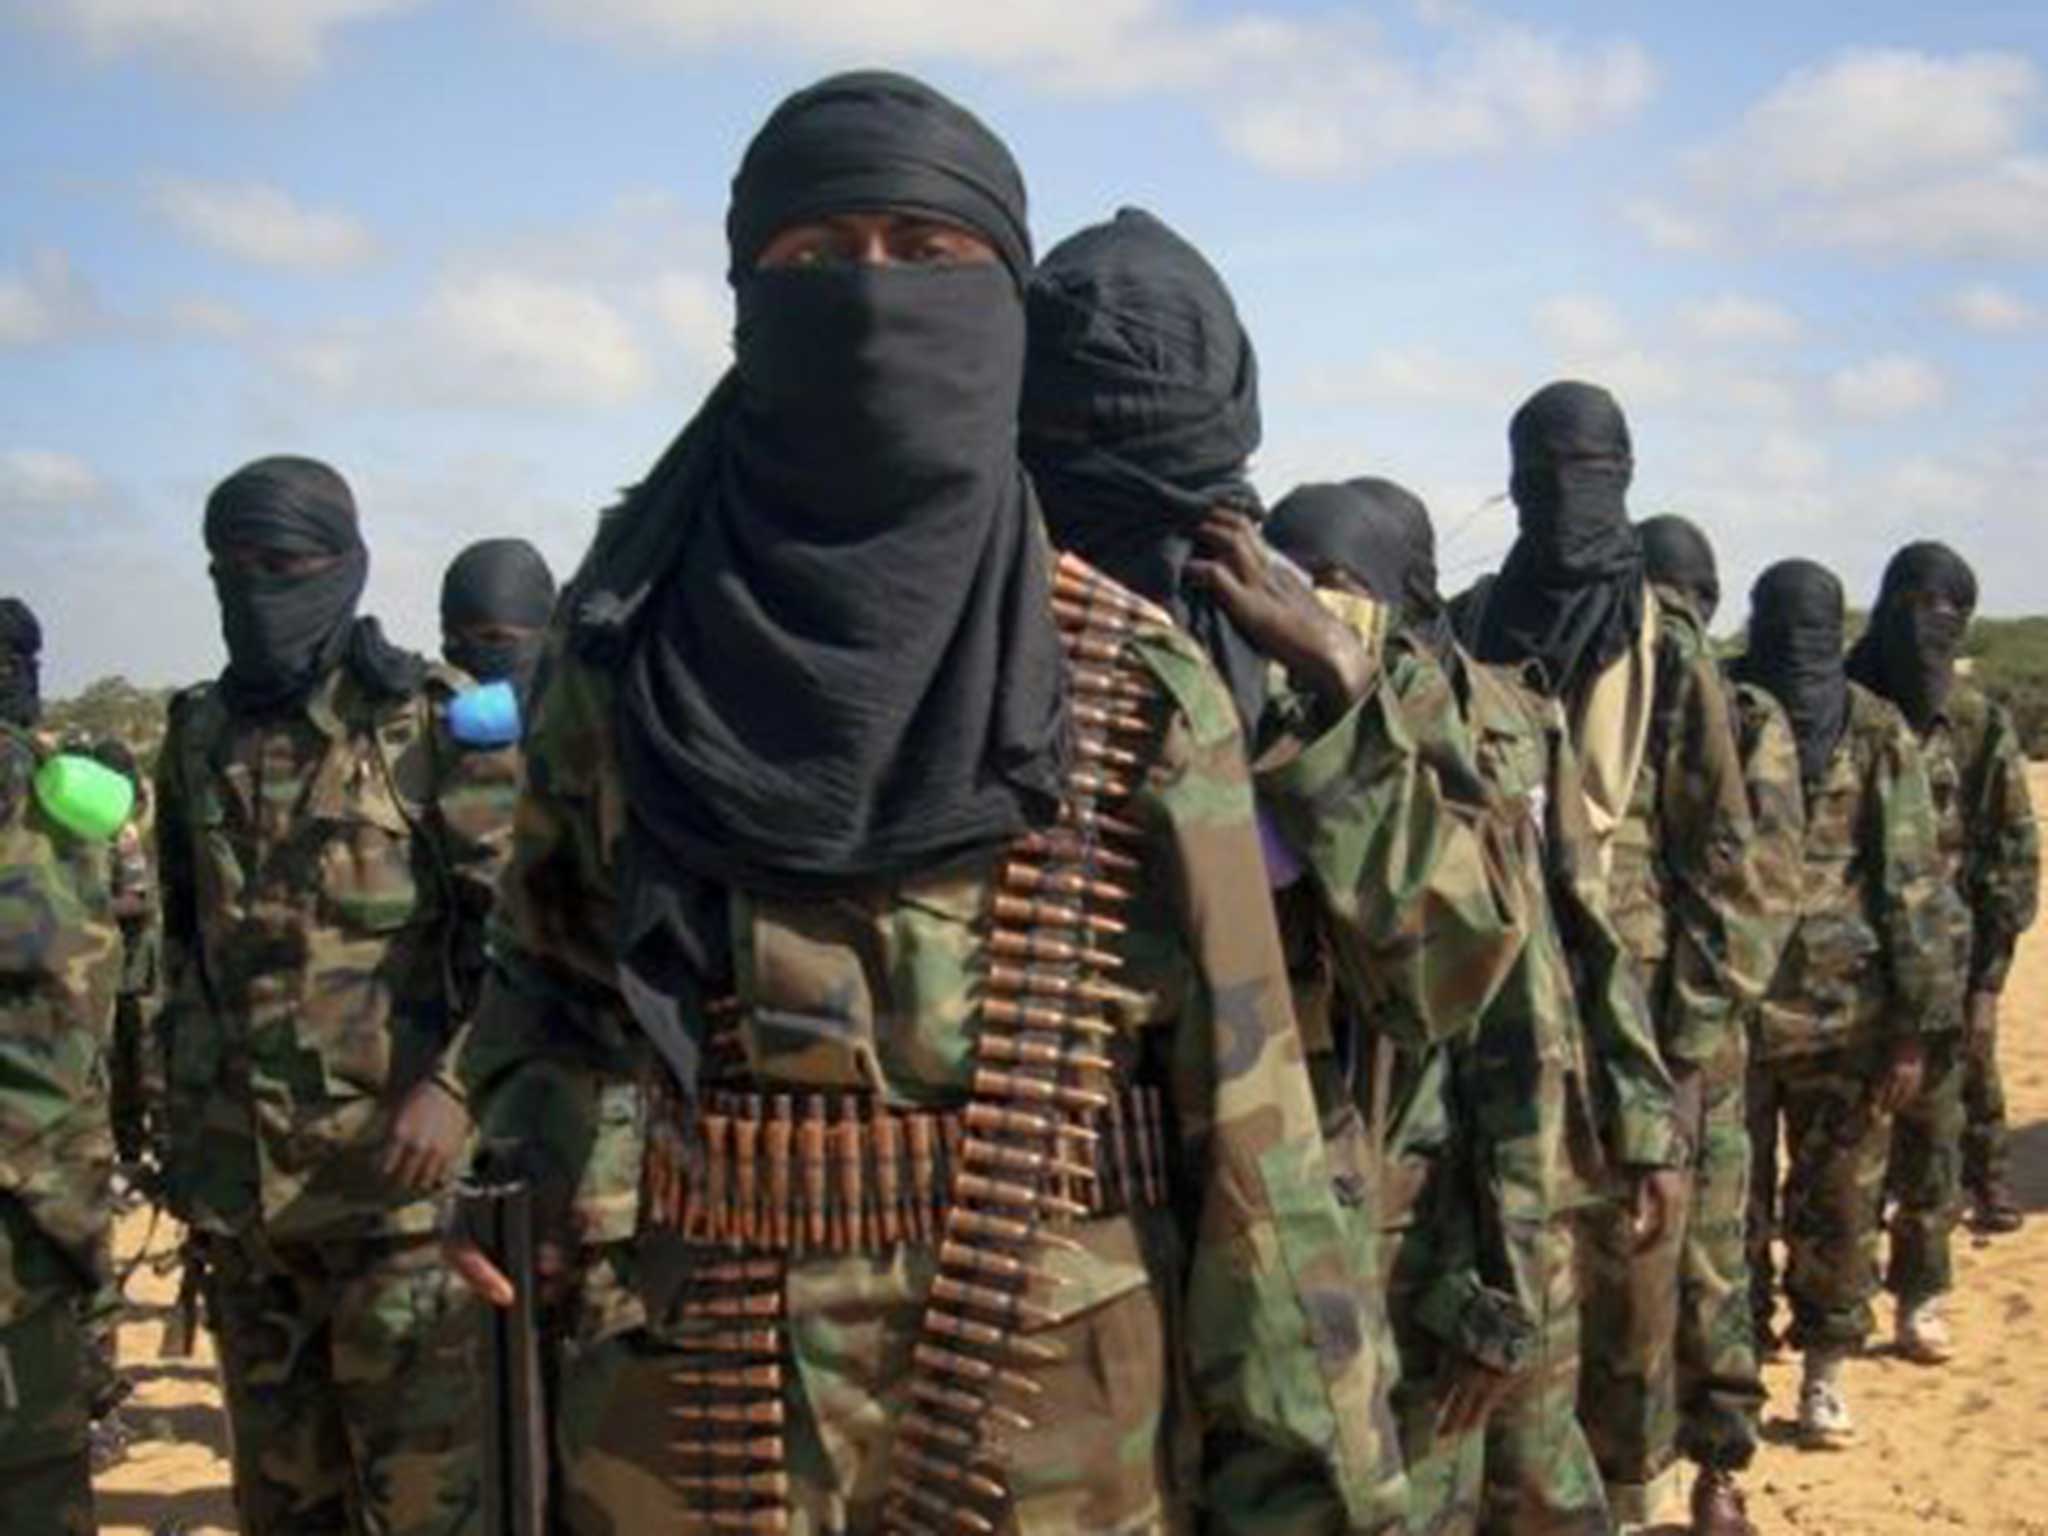 Somali terror group al-Shabaab claimed responsibility for the attack saying they were targeting a Christmas party at the base which houses UN offices, among others